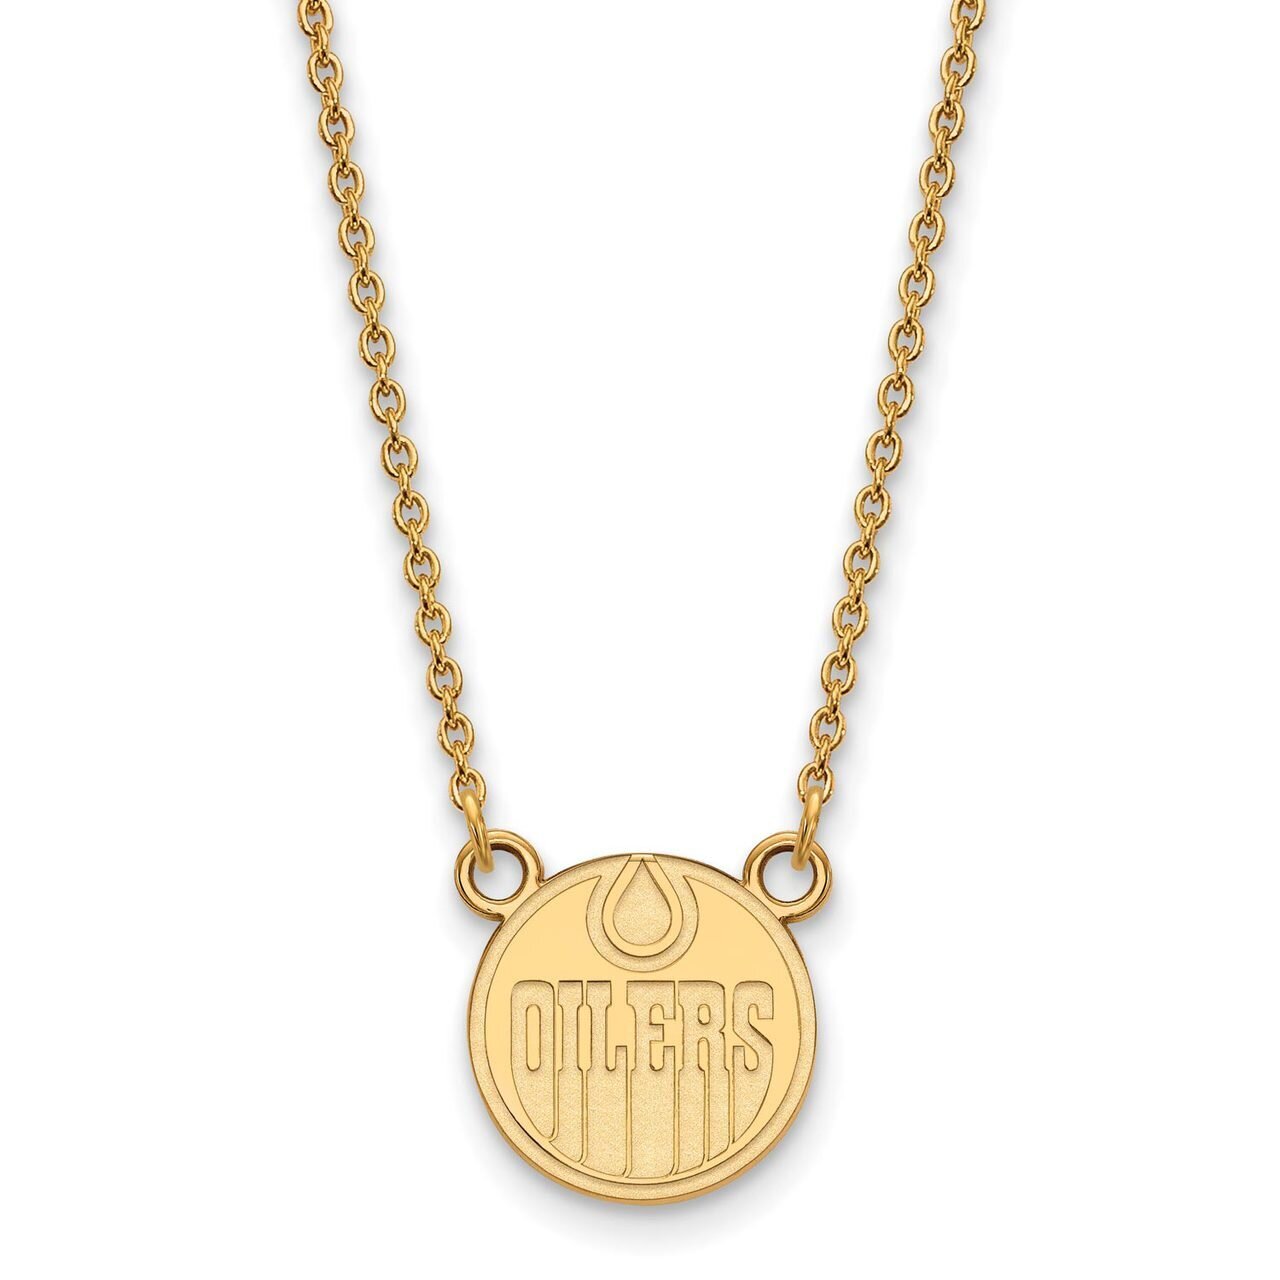 Edmonton Oilers Small Pendant with Chain Necklace 10k Yellow Gold 1Y007OIL-18